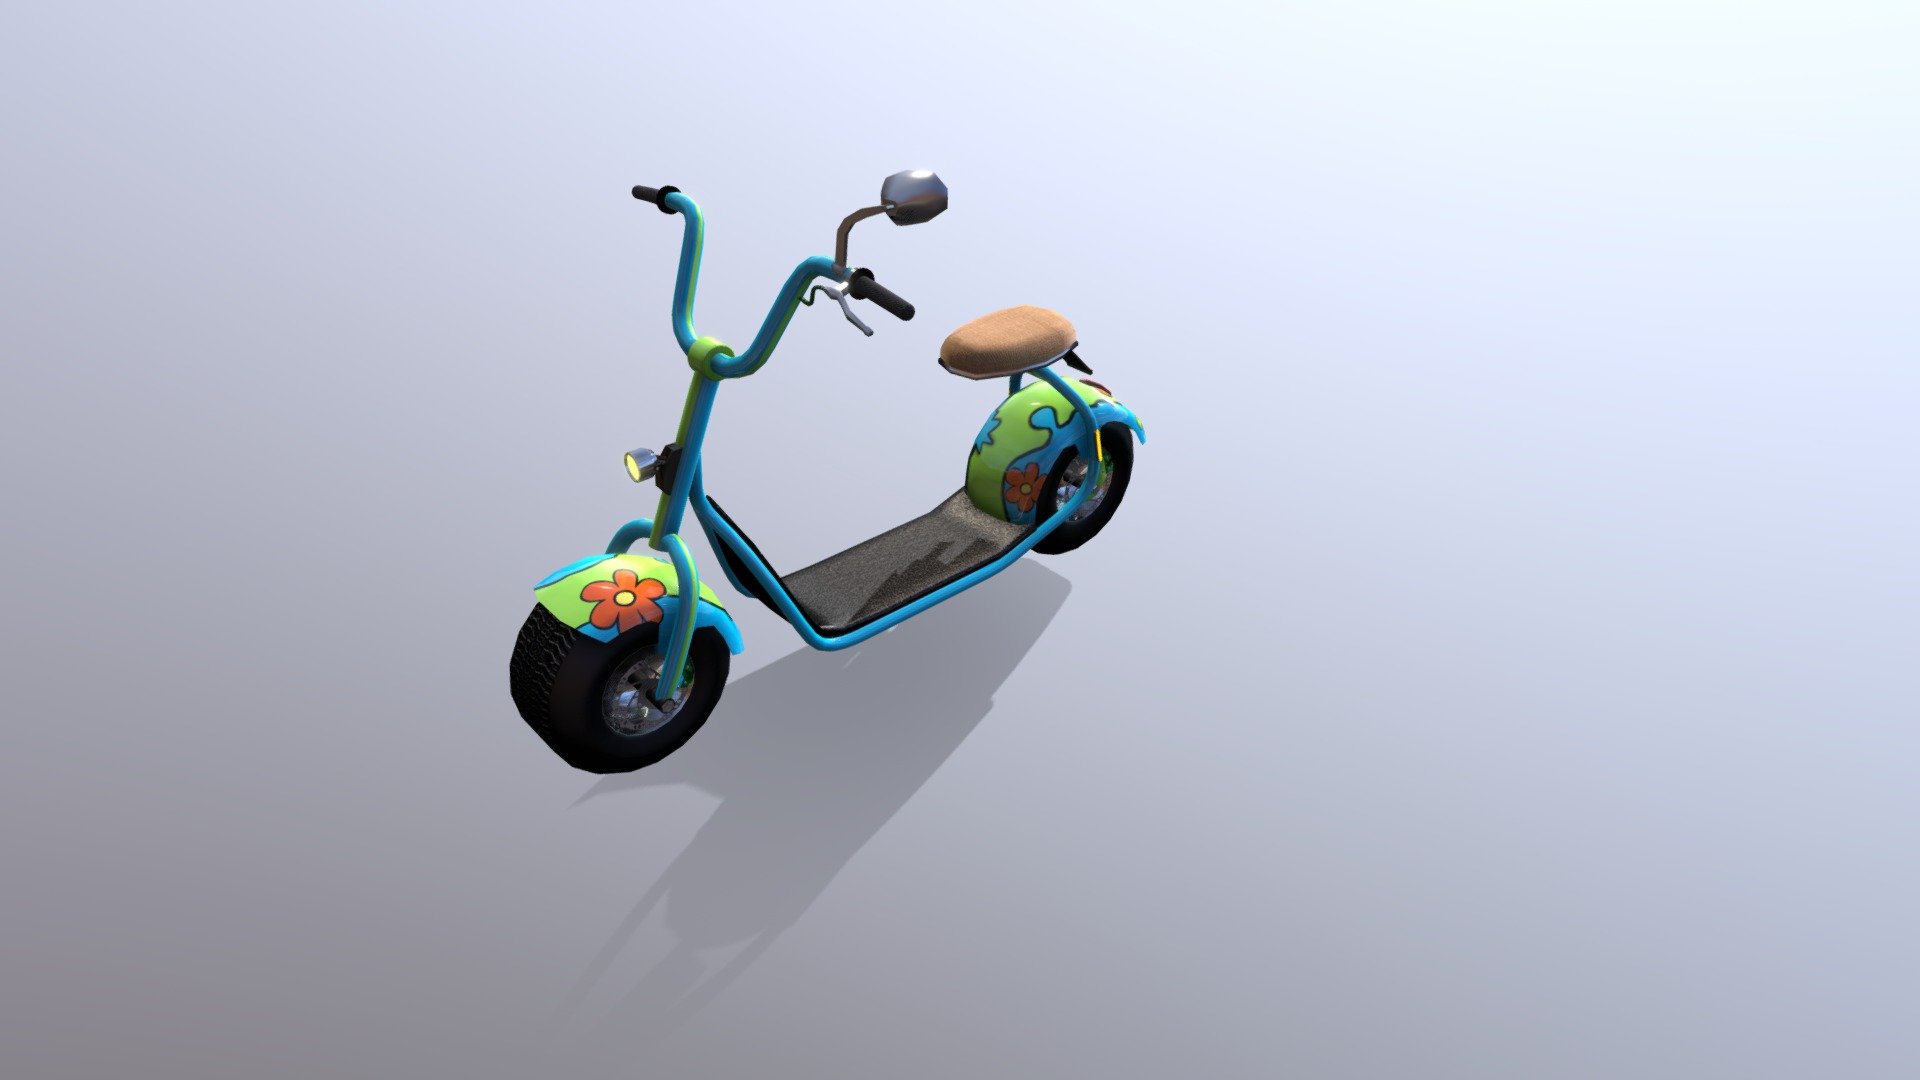 After Scooby passed away Fred and Daphne got married. Velma went to work for N.A.S.A. As for shaggy, He got himself this groovy cruising scooter called a &ldquo;scrooser